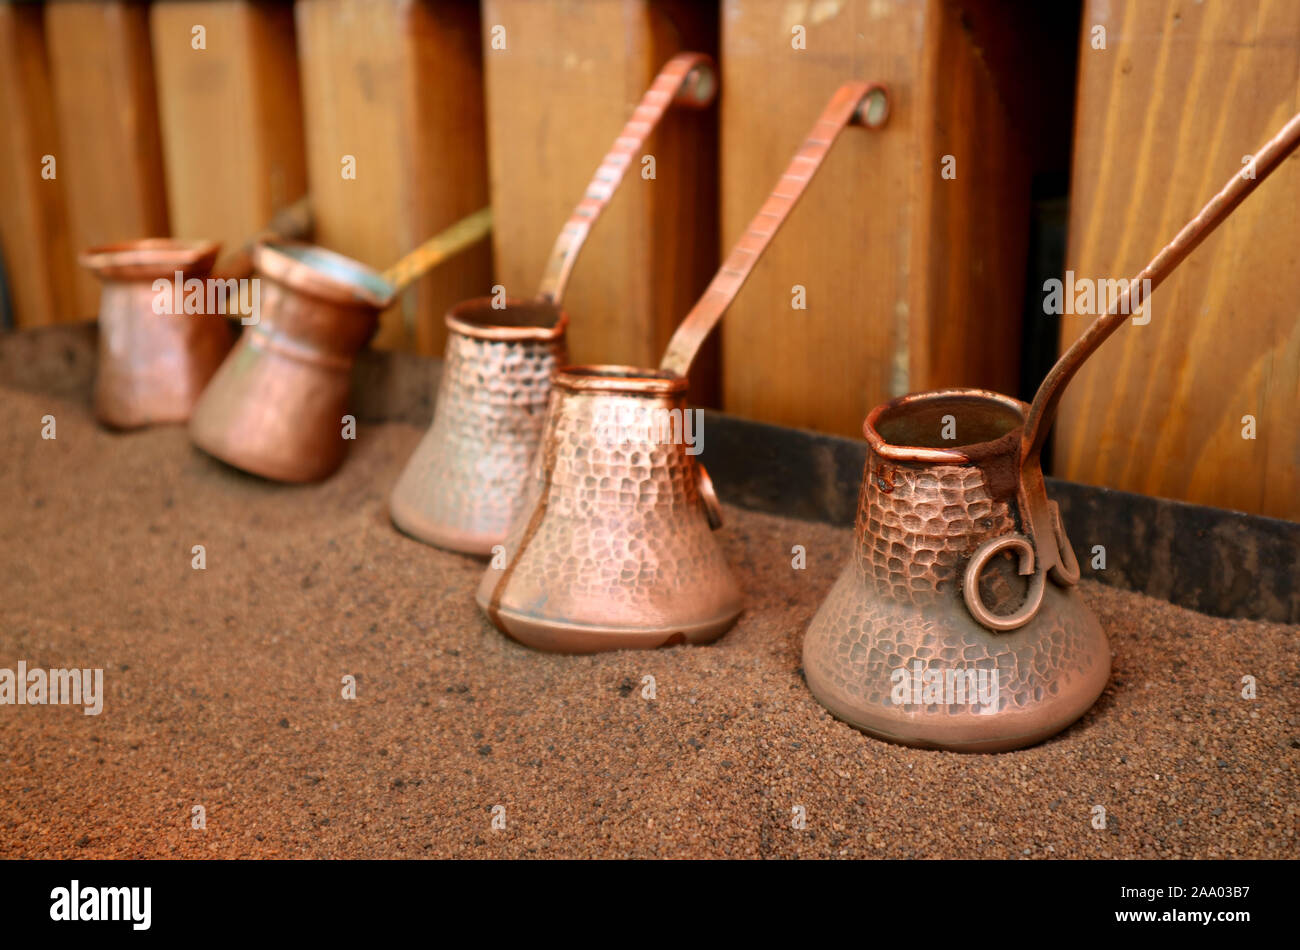 Closeup Turkish Coffee Boilers Placed on the Hot Sand Stock Photo